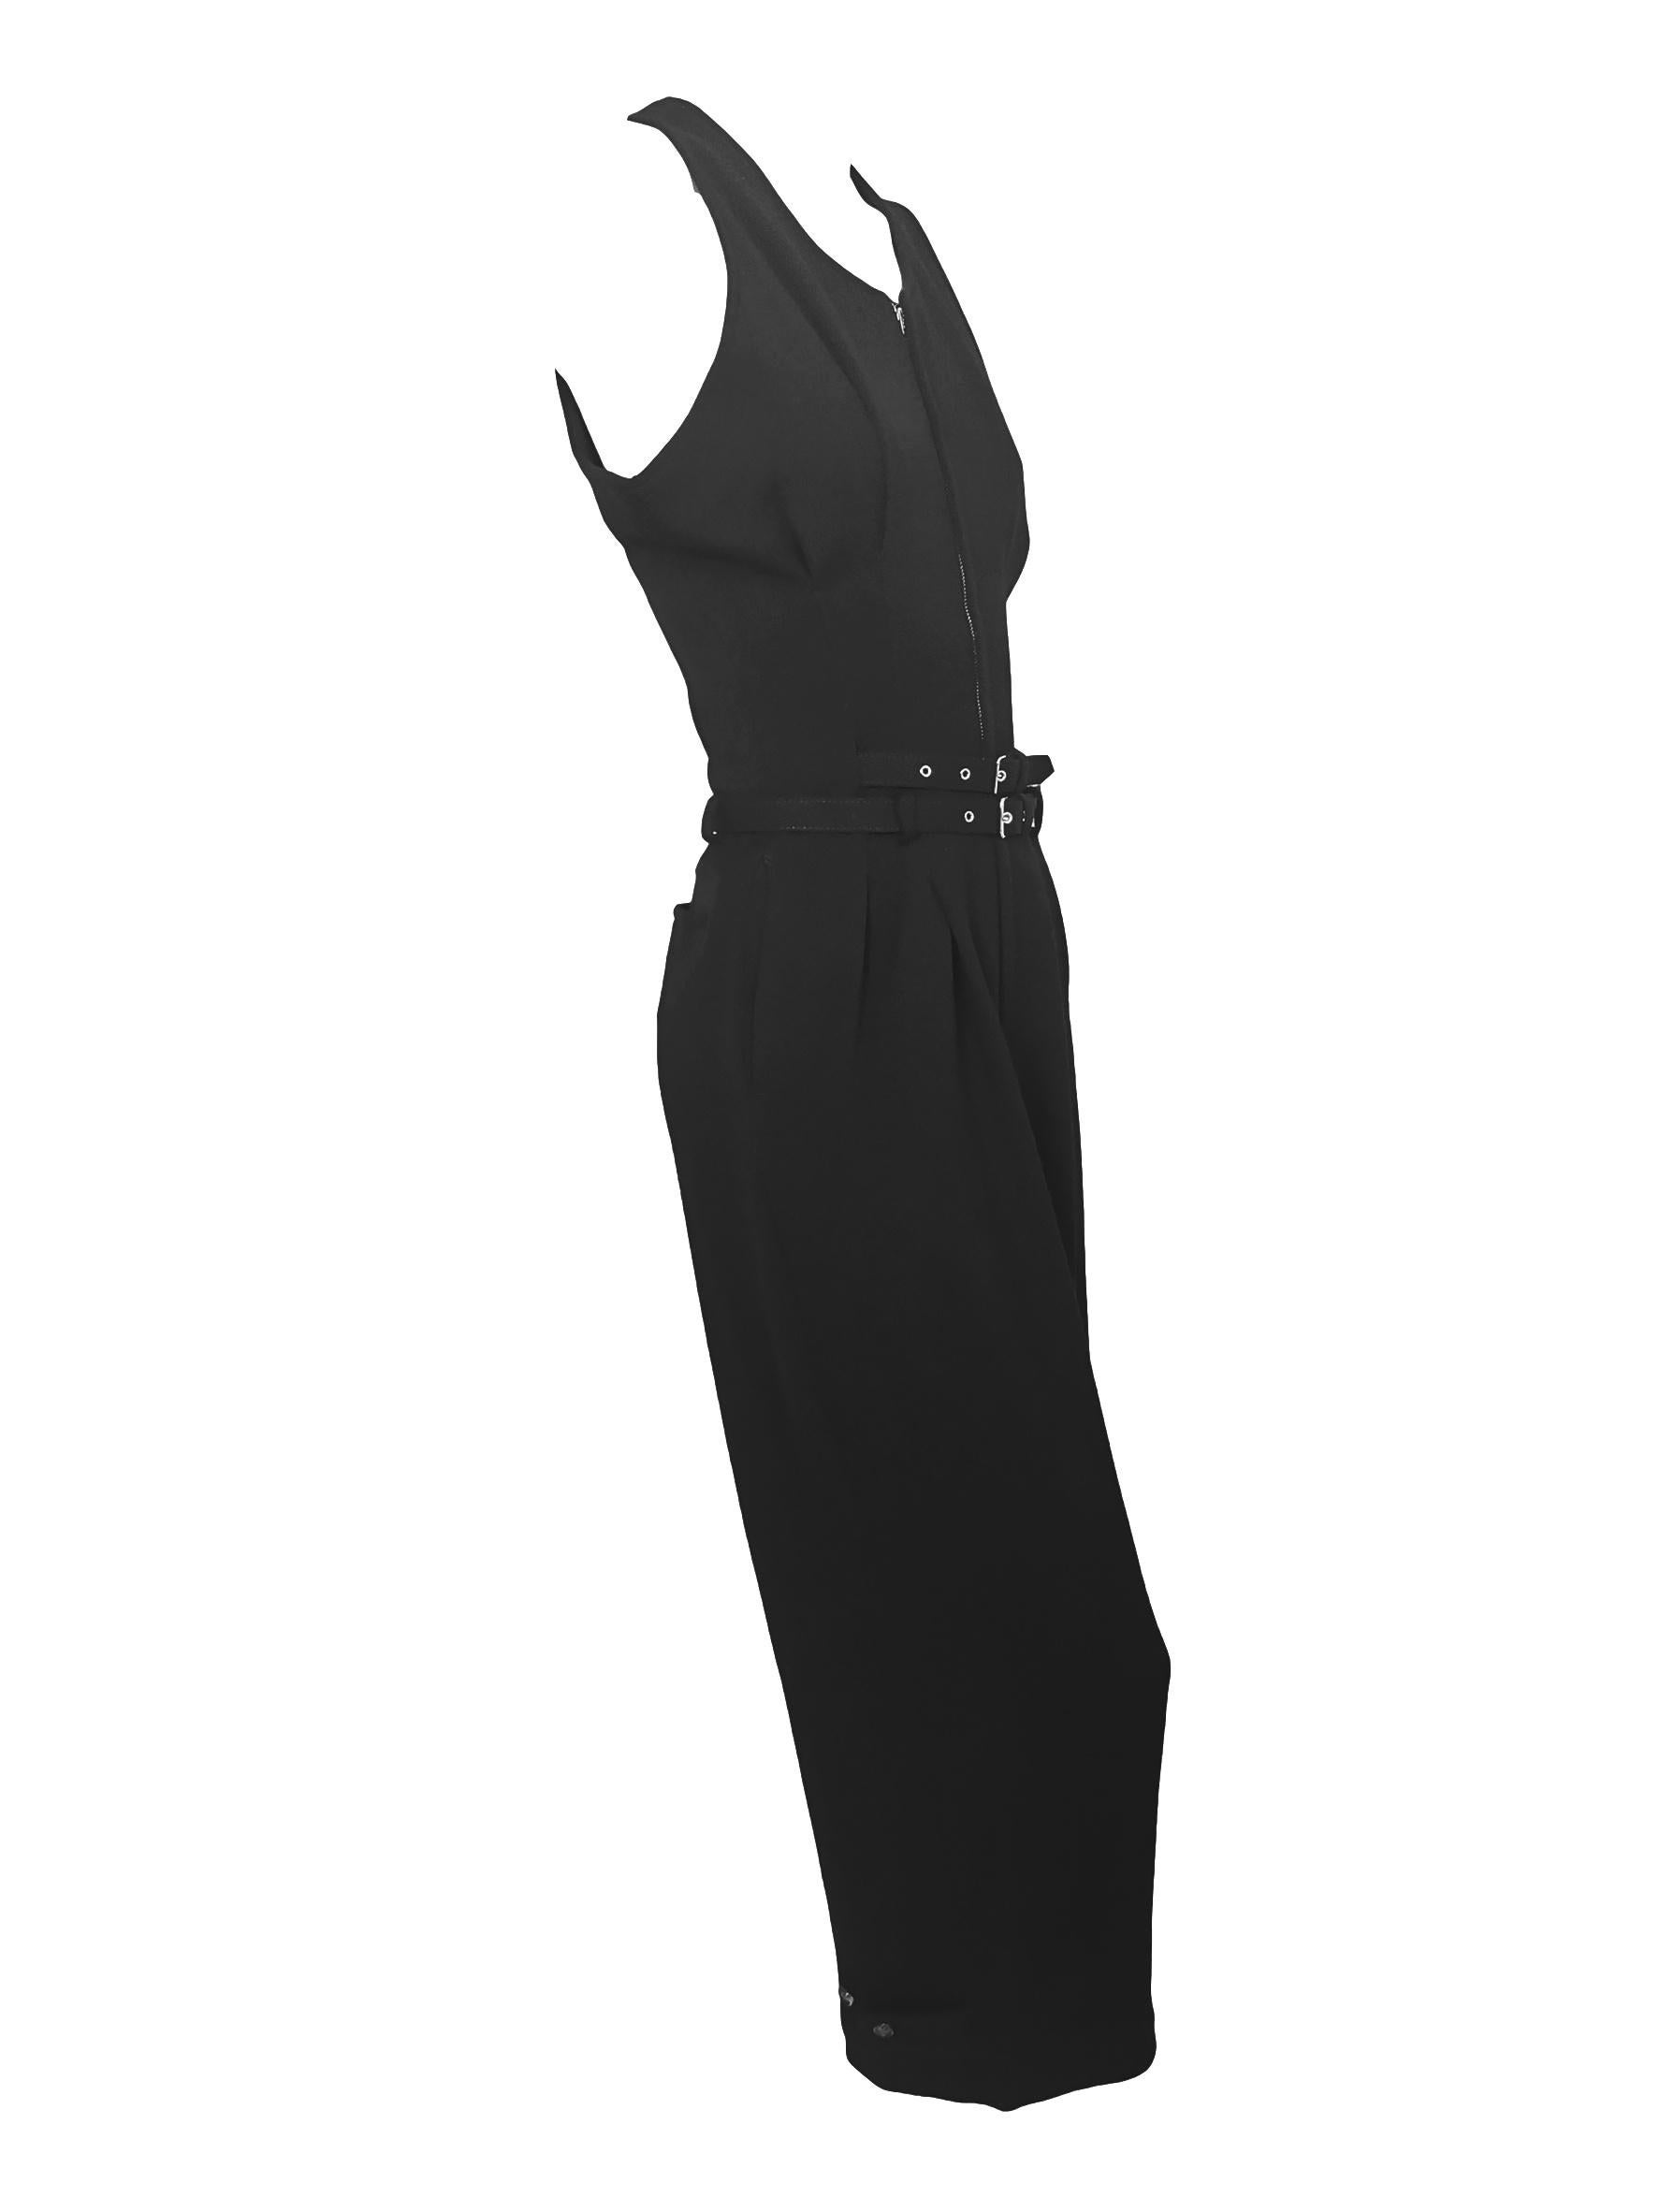 Comme des Garcons Wool Double Belted Jumpsuit AD 1989 For Sale 9